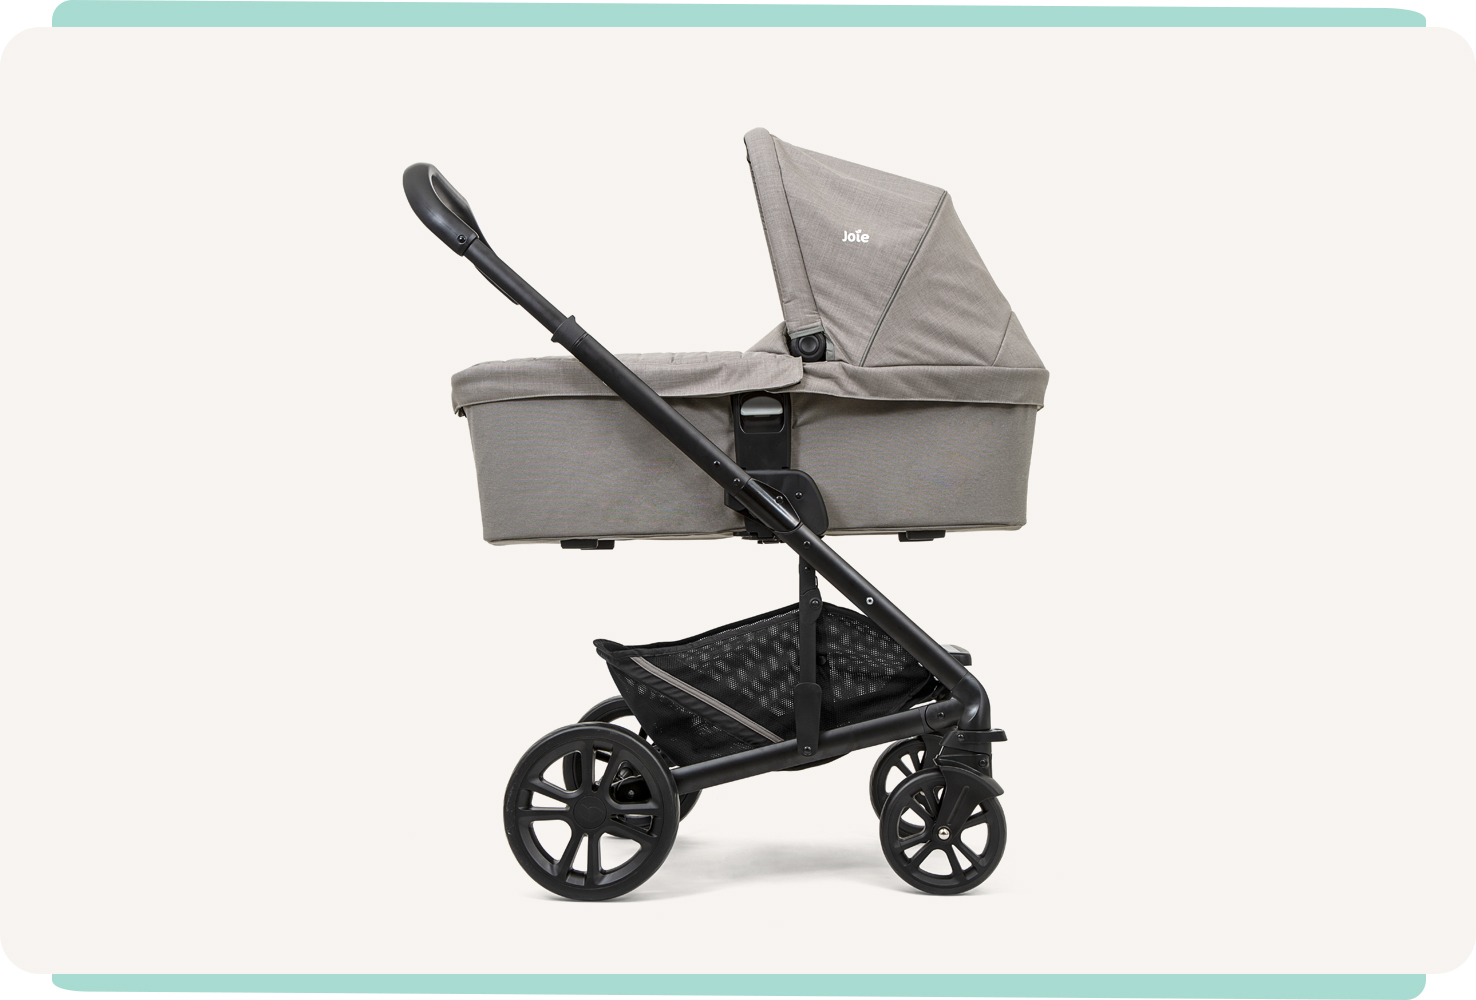   Joie chrome carry cot in light gray in profile on a pram. 